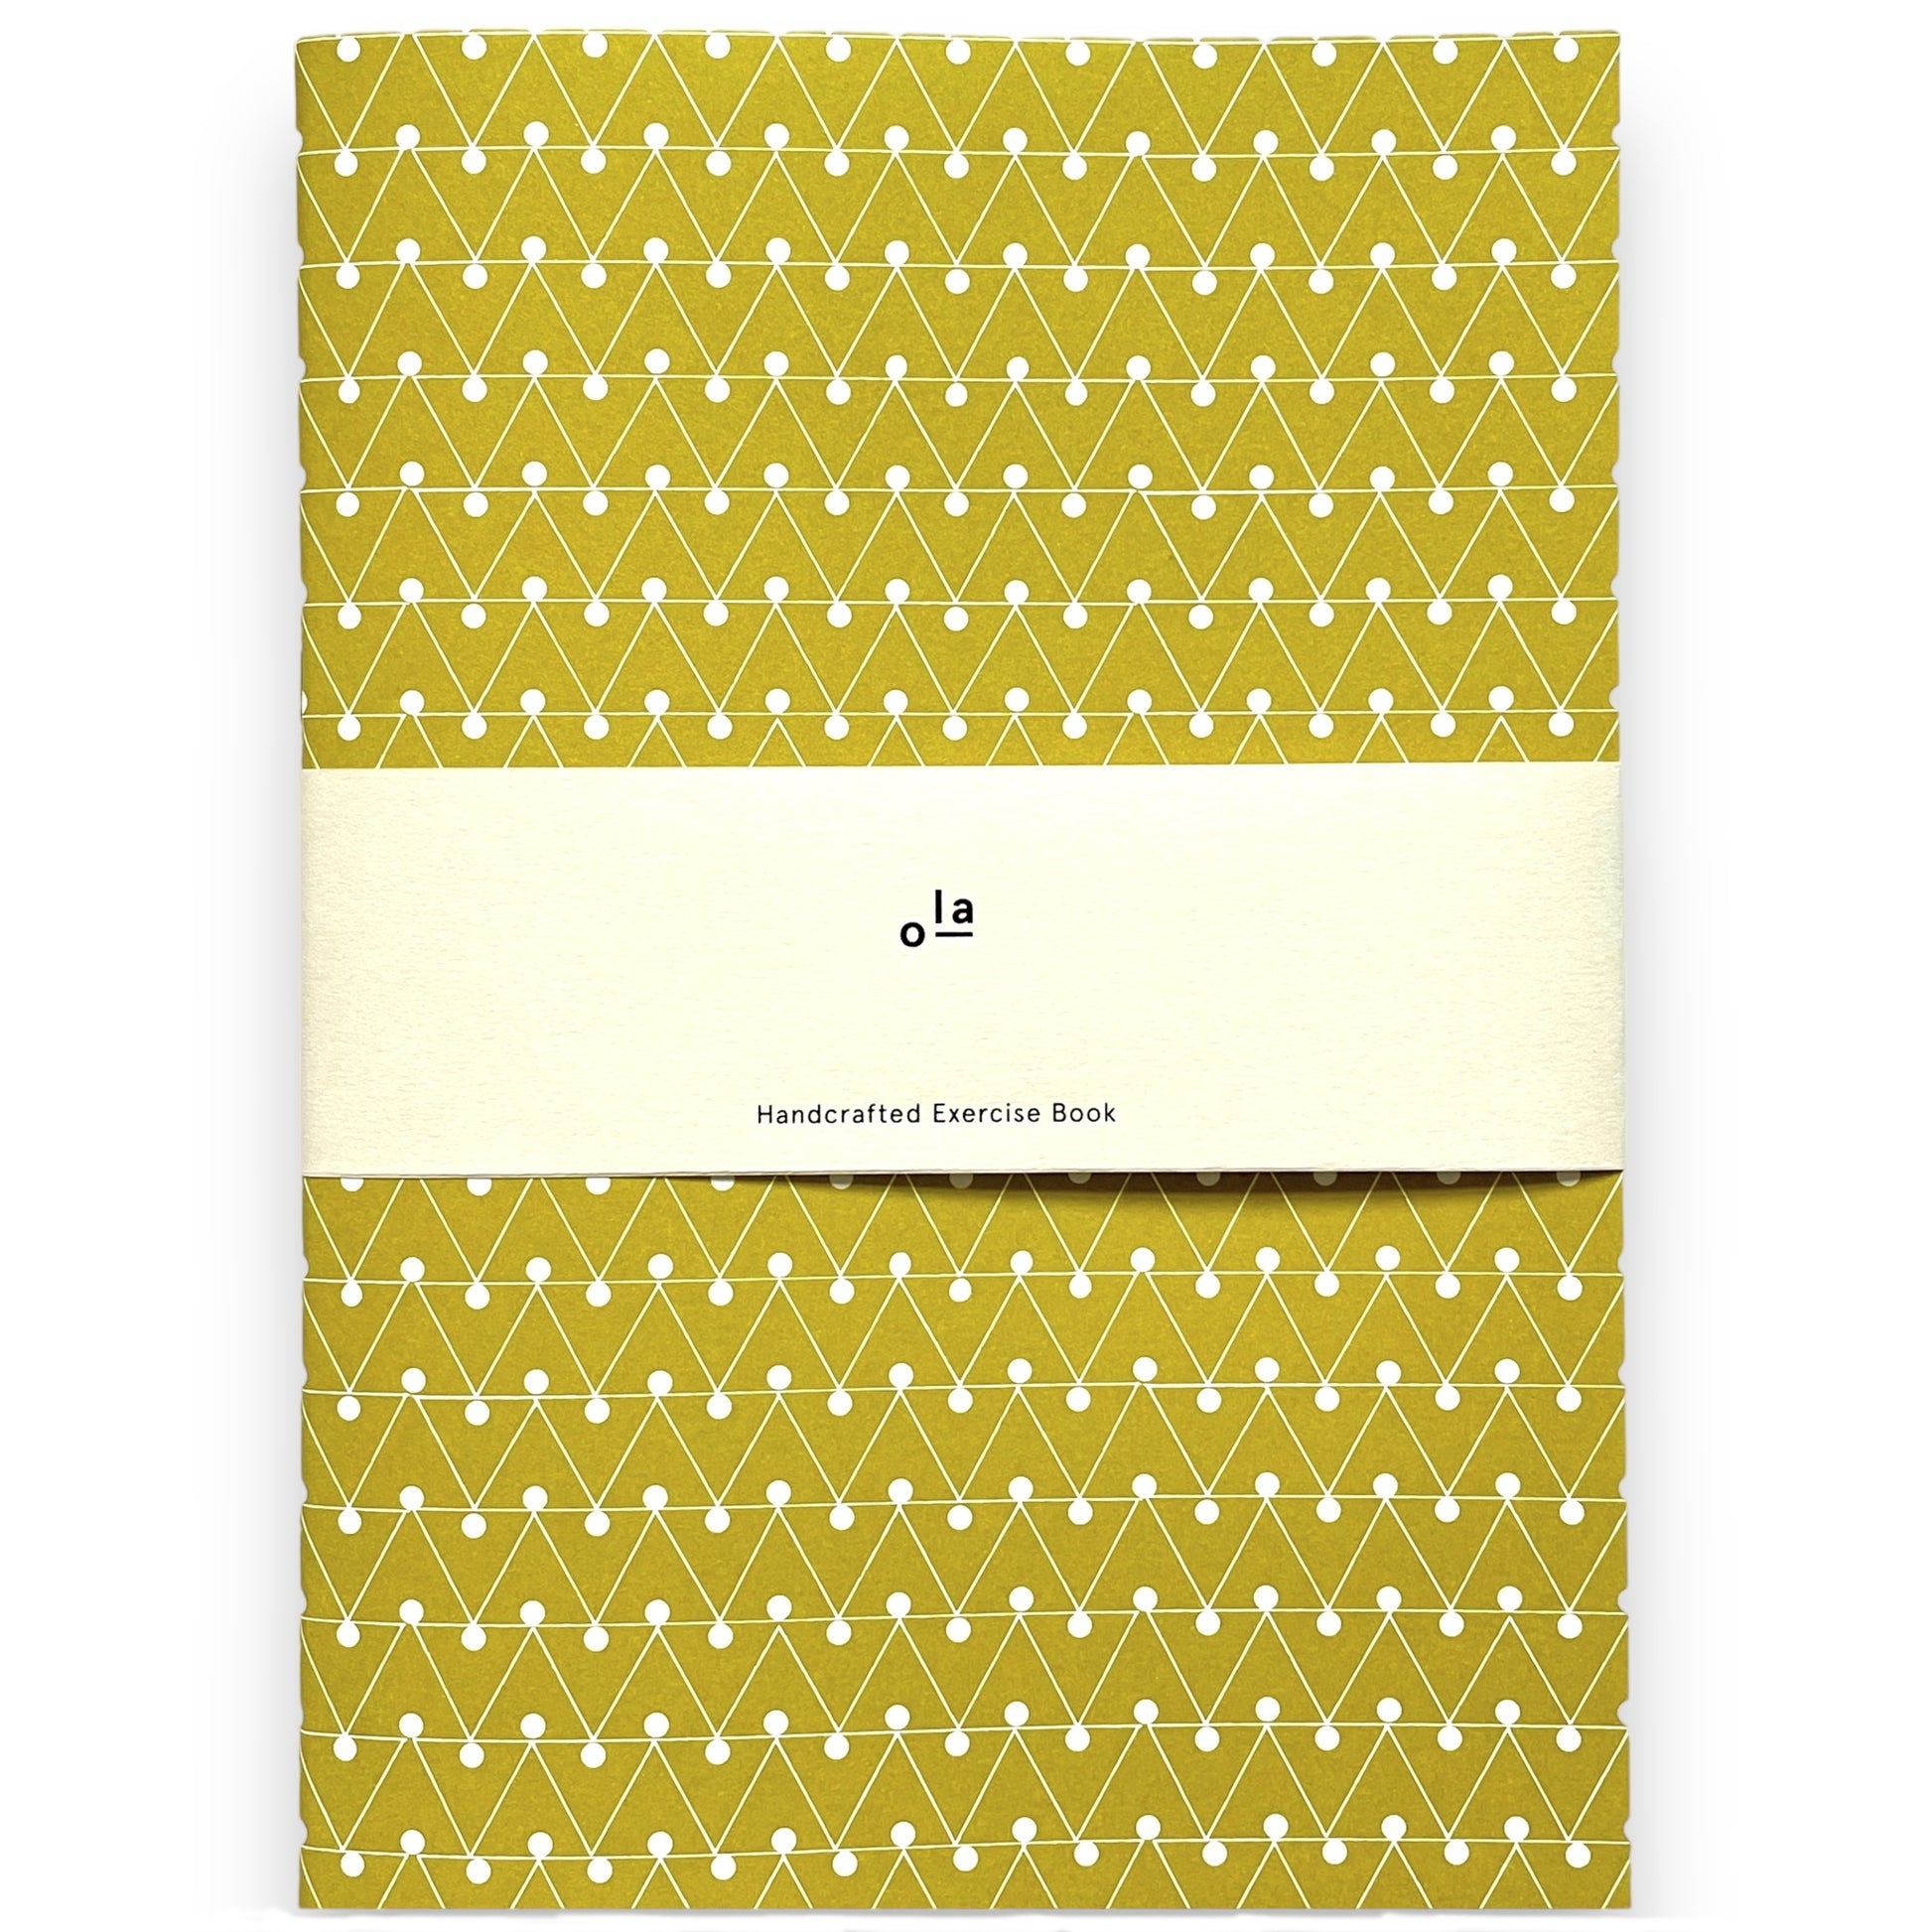 Slimline, softcover exercise book by Ola Studio with a triangular geometric cover in mustard and white, pictured with branded presentation band